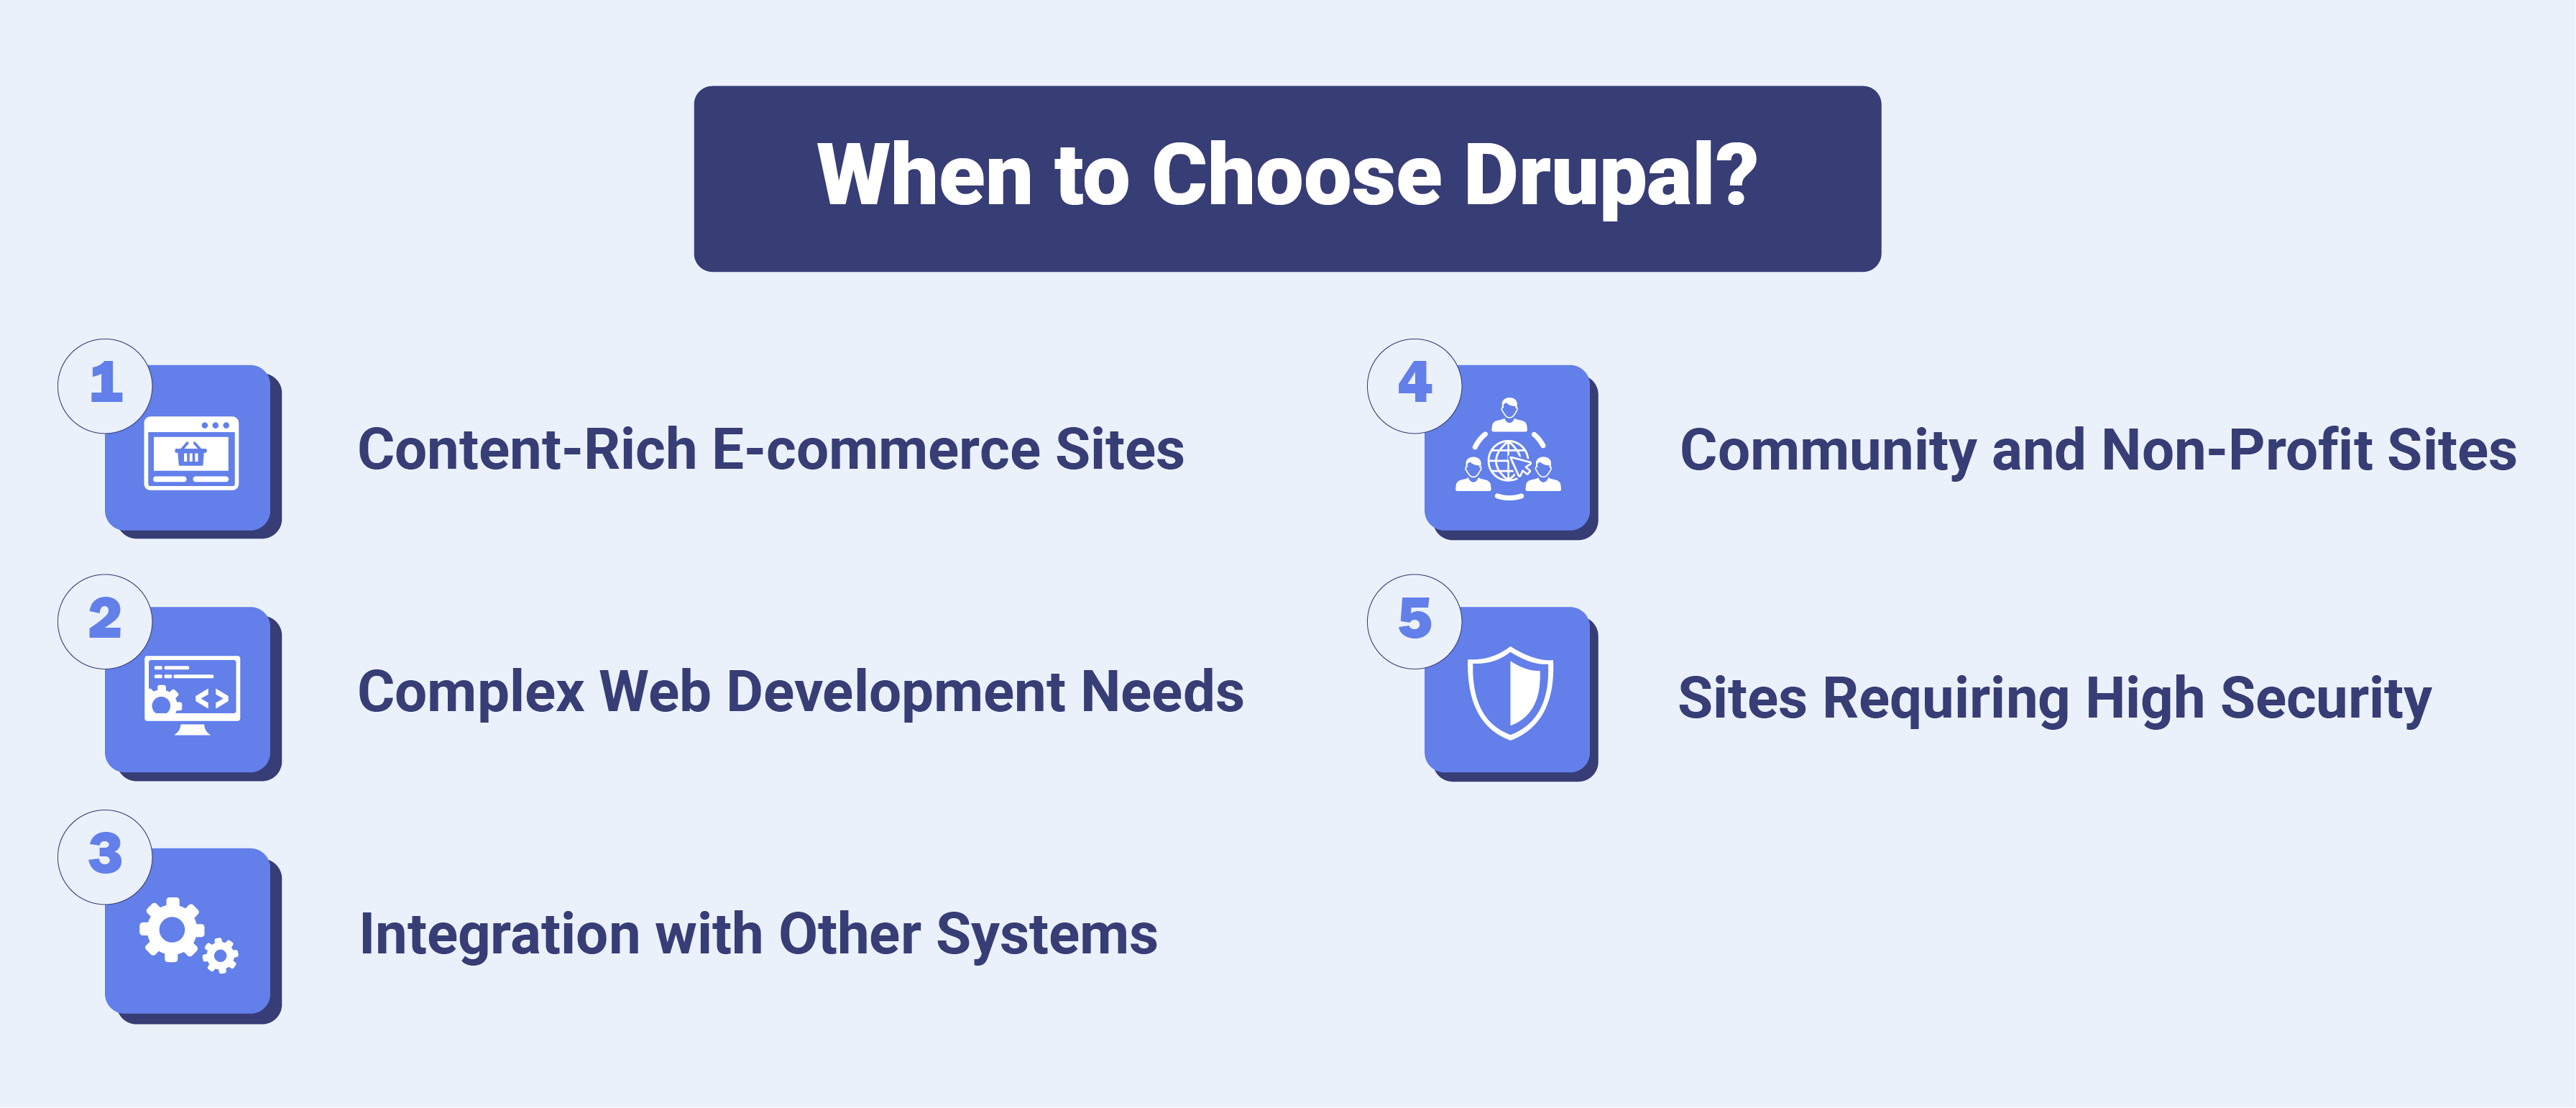 When is Drupal a Better Choice